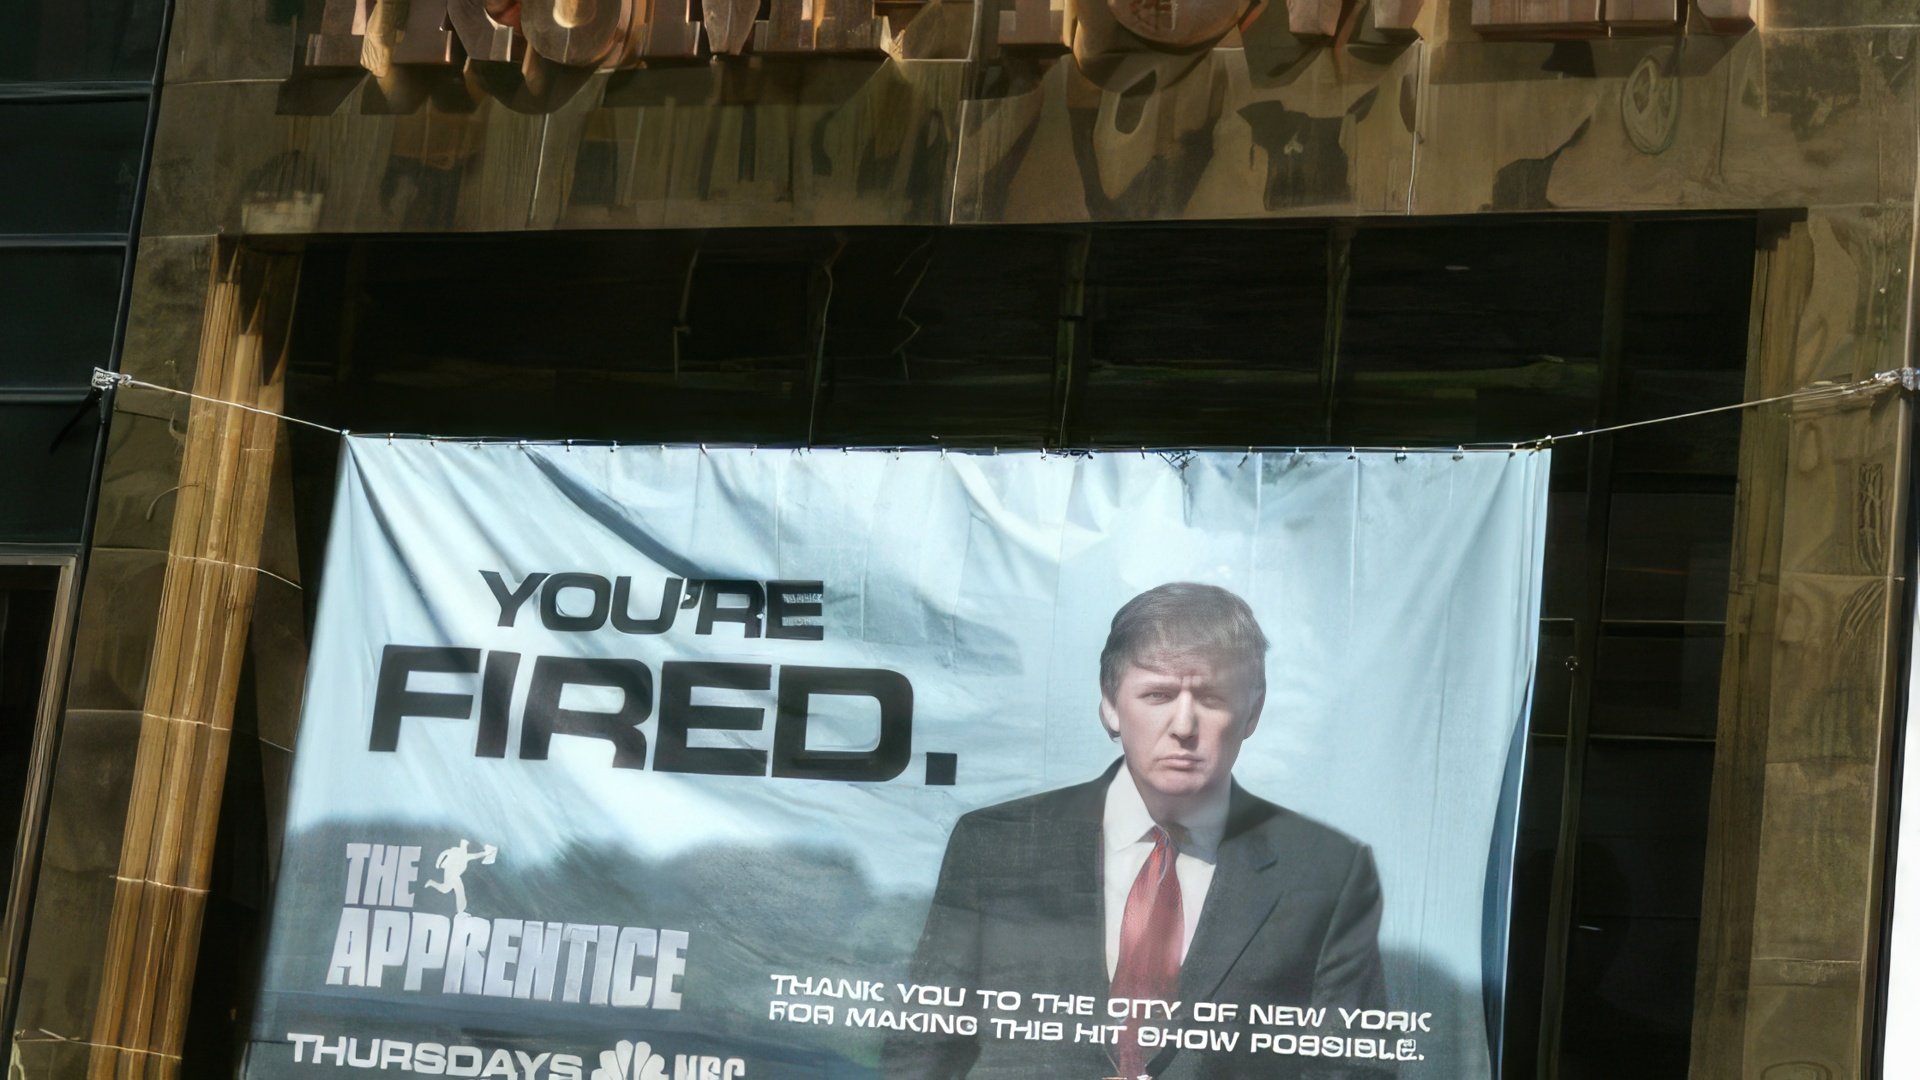 Every Thursday, the legendary 'You're fired!' was heard on NBC